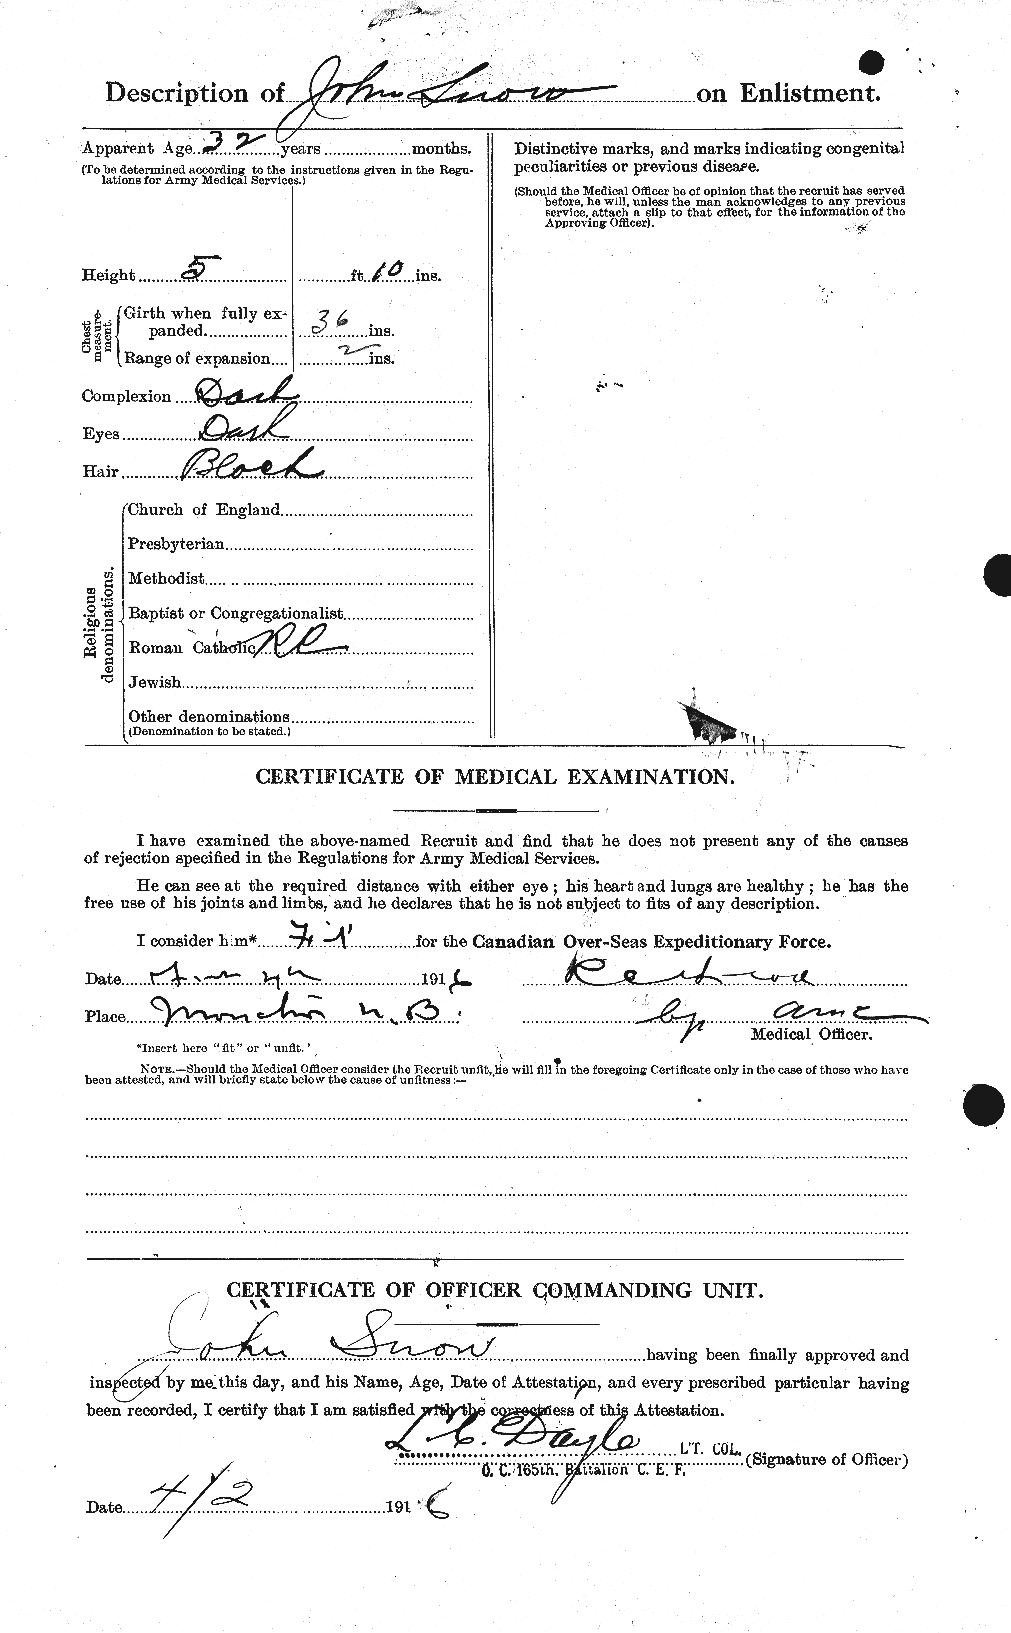 Personnel Records of the First World War - CEF 108948b